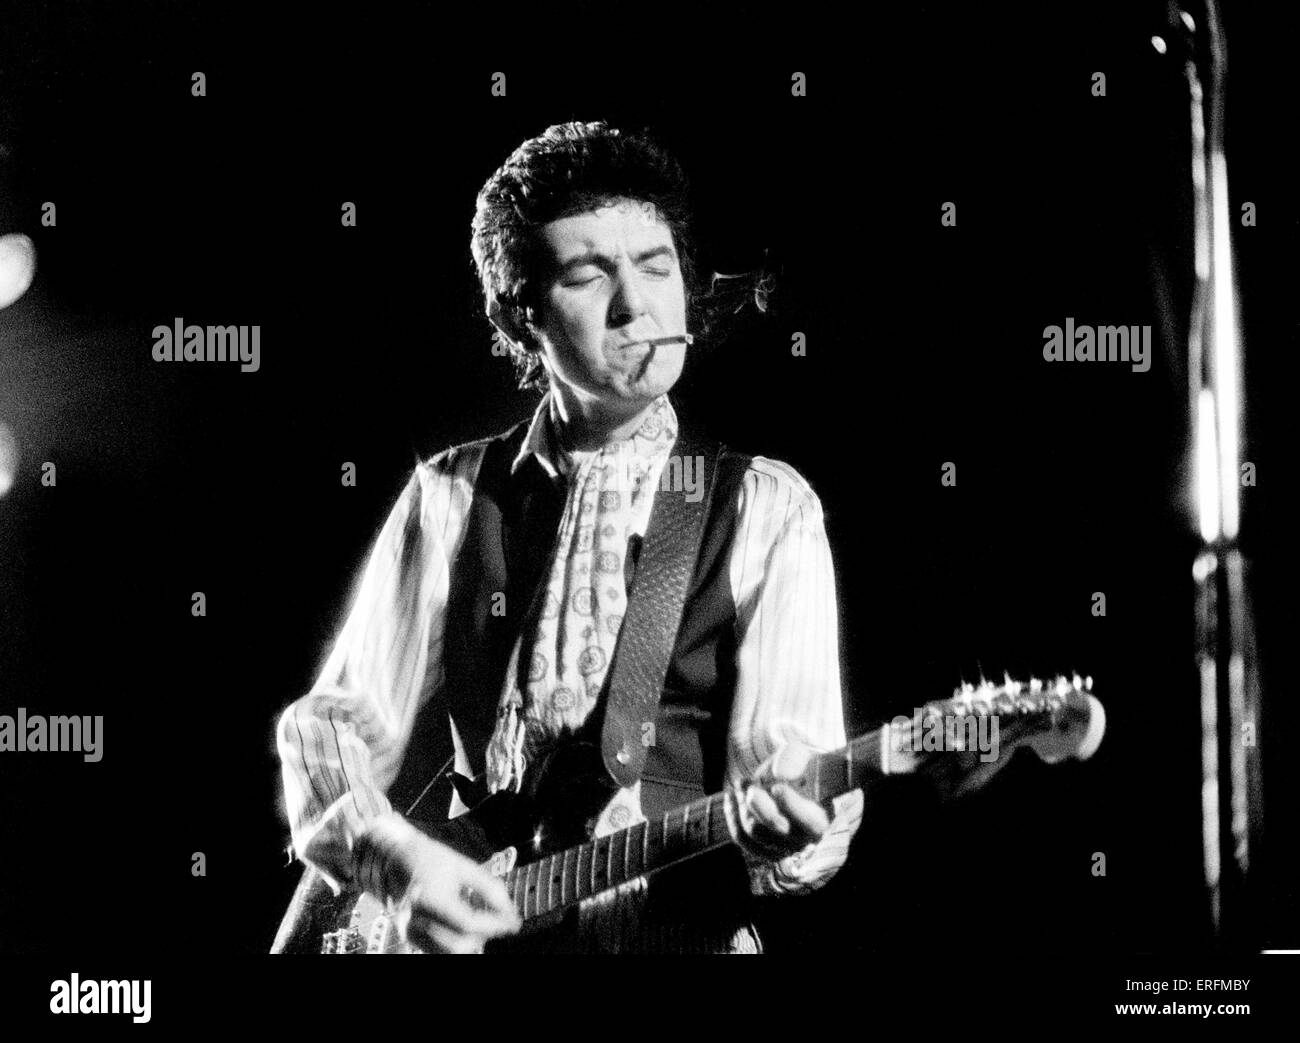 Ronnie Lane - portrait of the English singer & bass player performing in London, 1980. Cigarette in mouth. 1946-1997. Nicknamed Stock Photo